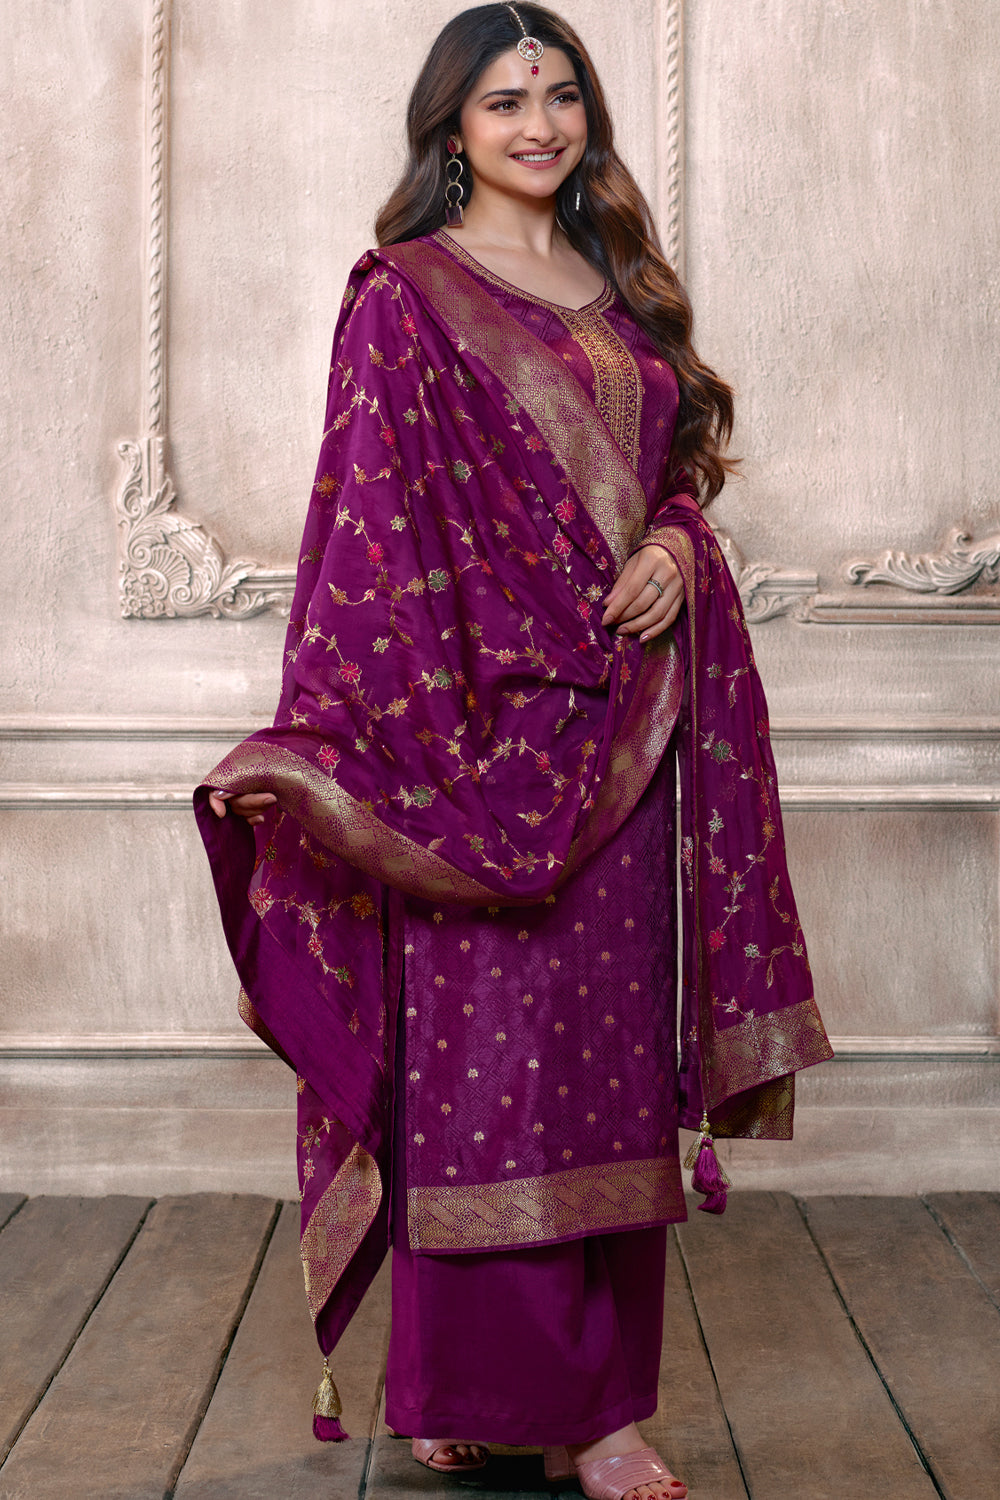 Dark Scarlet Color Silk Woven Unstitched Suit Material.